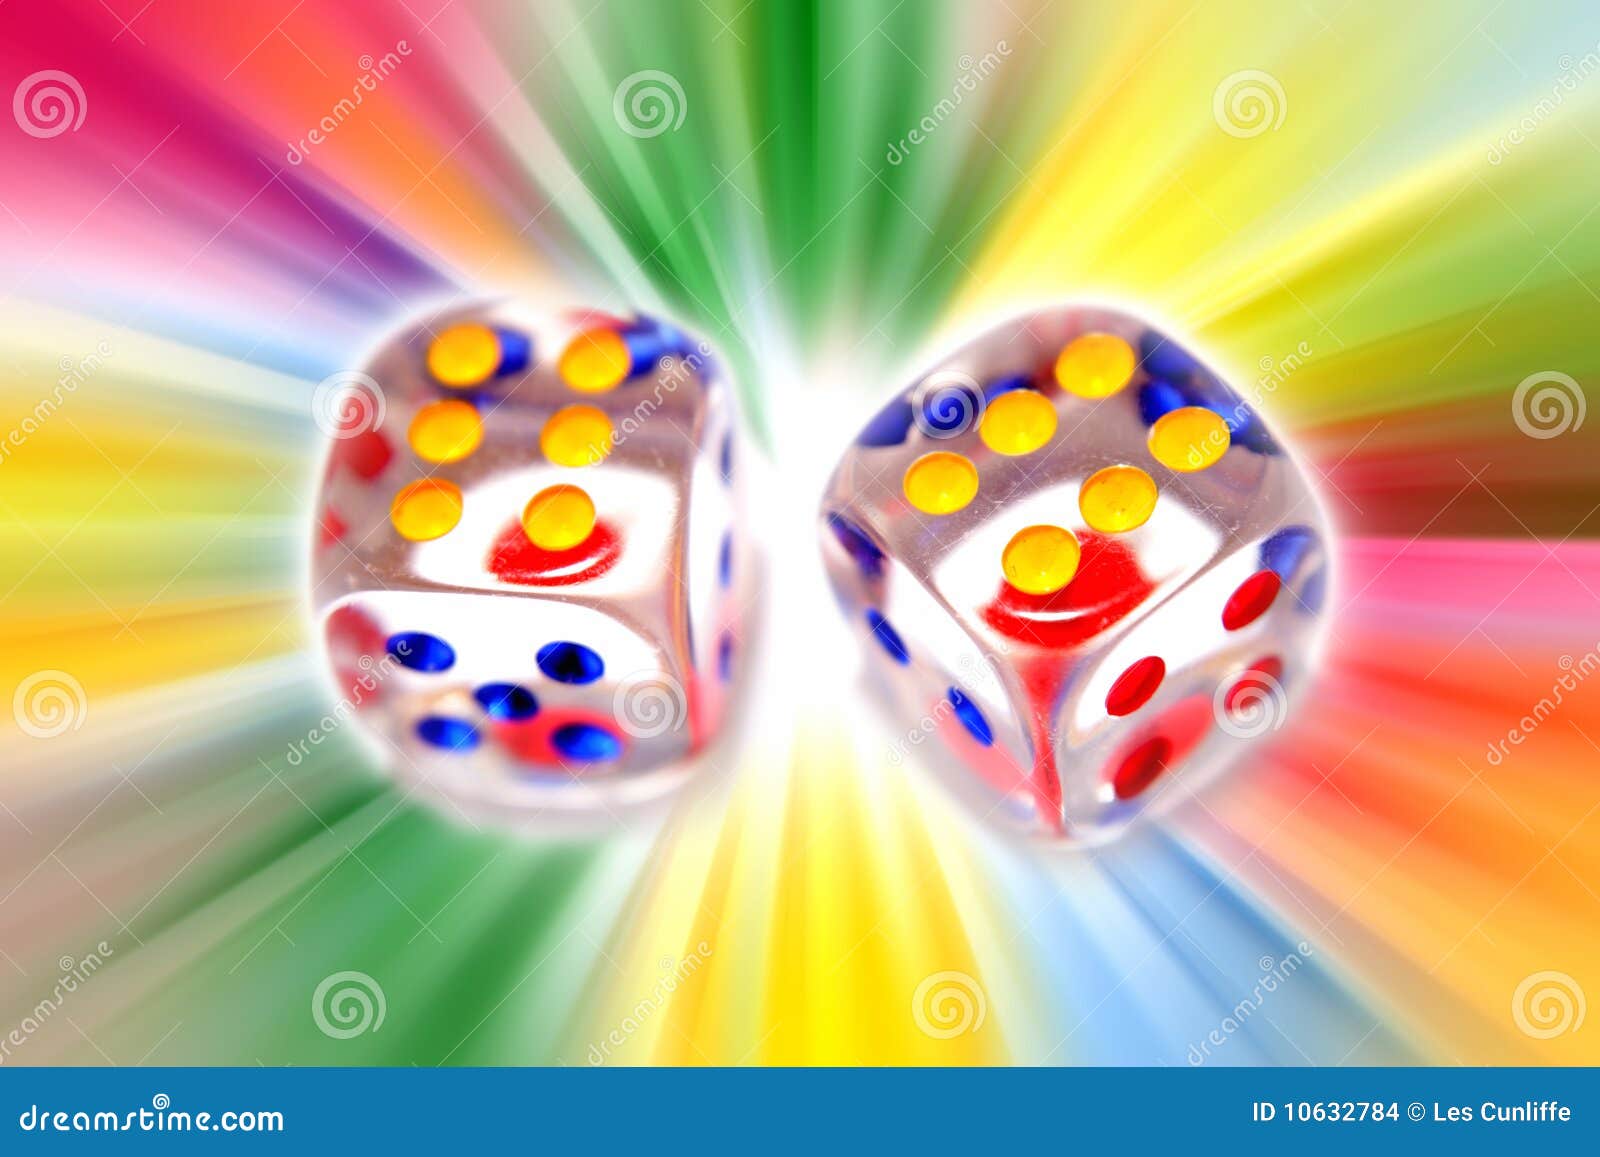 Two dice roll eight stock photo. Image of contrast, dice - 120523232